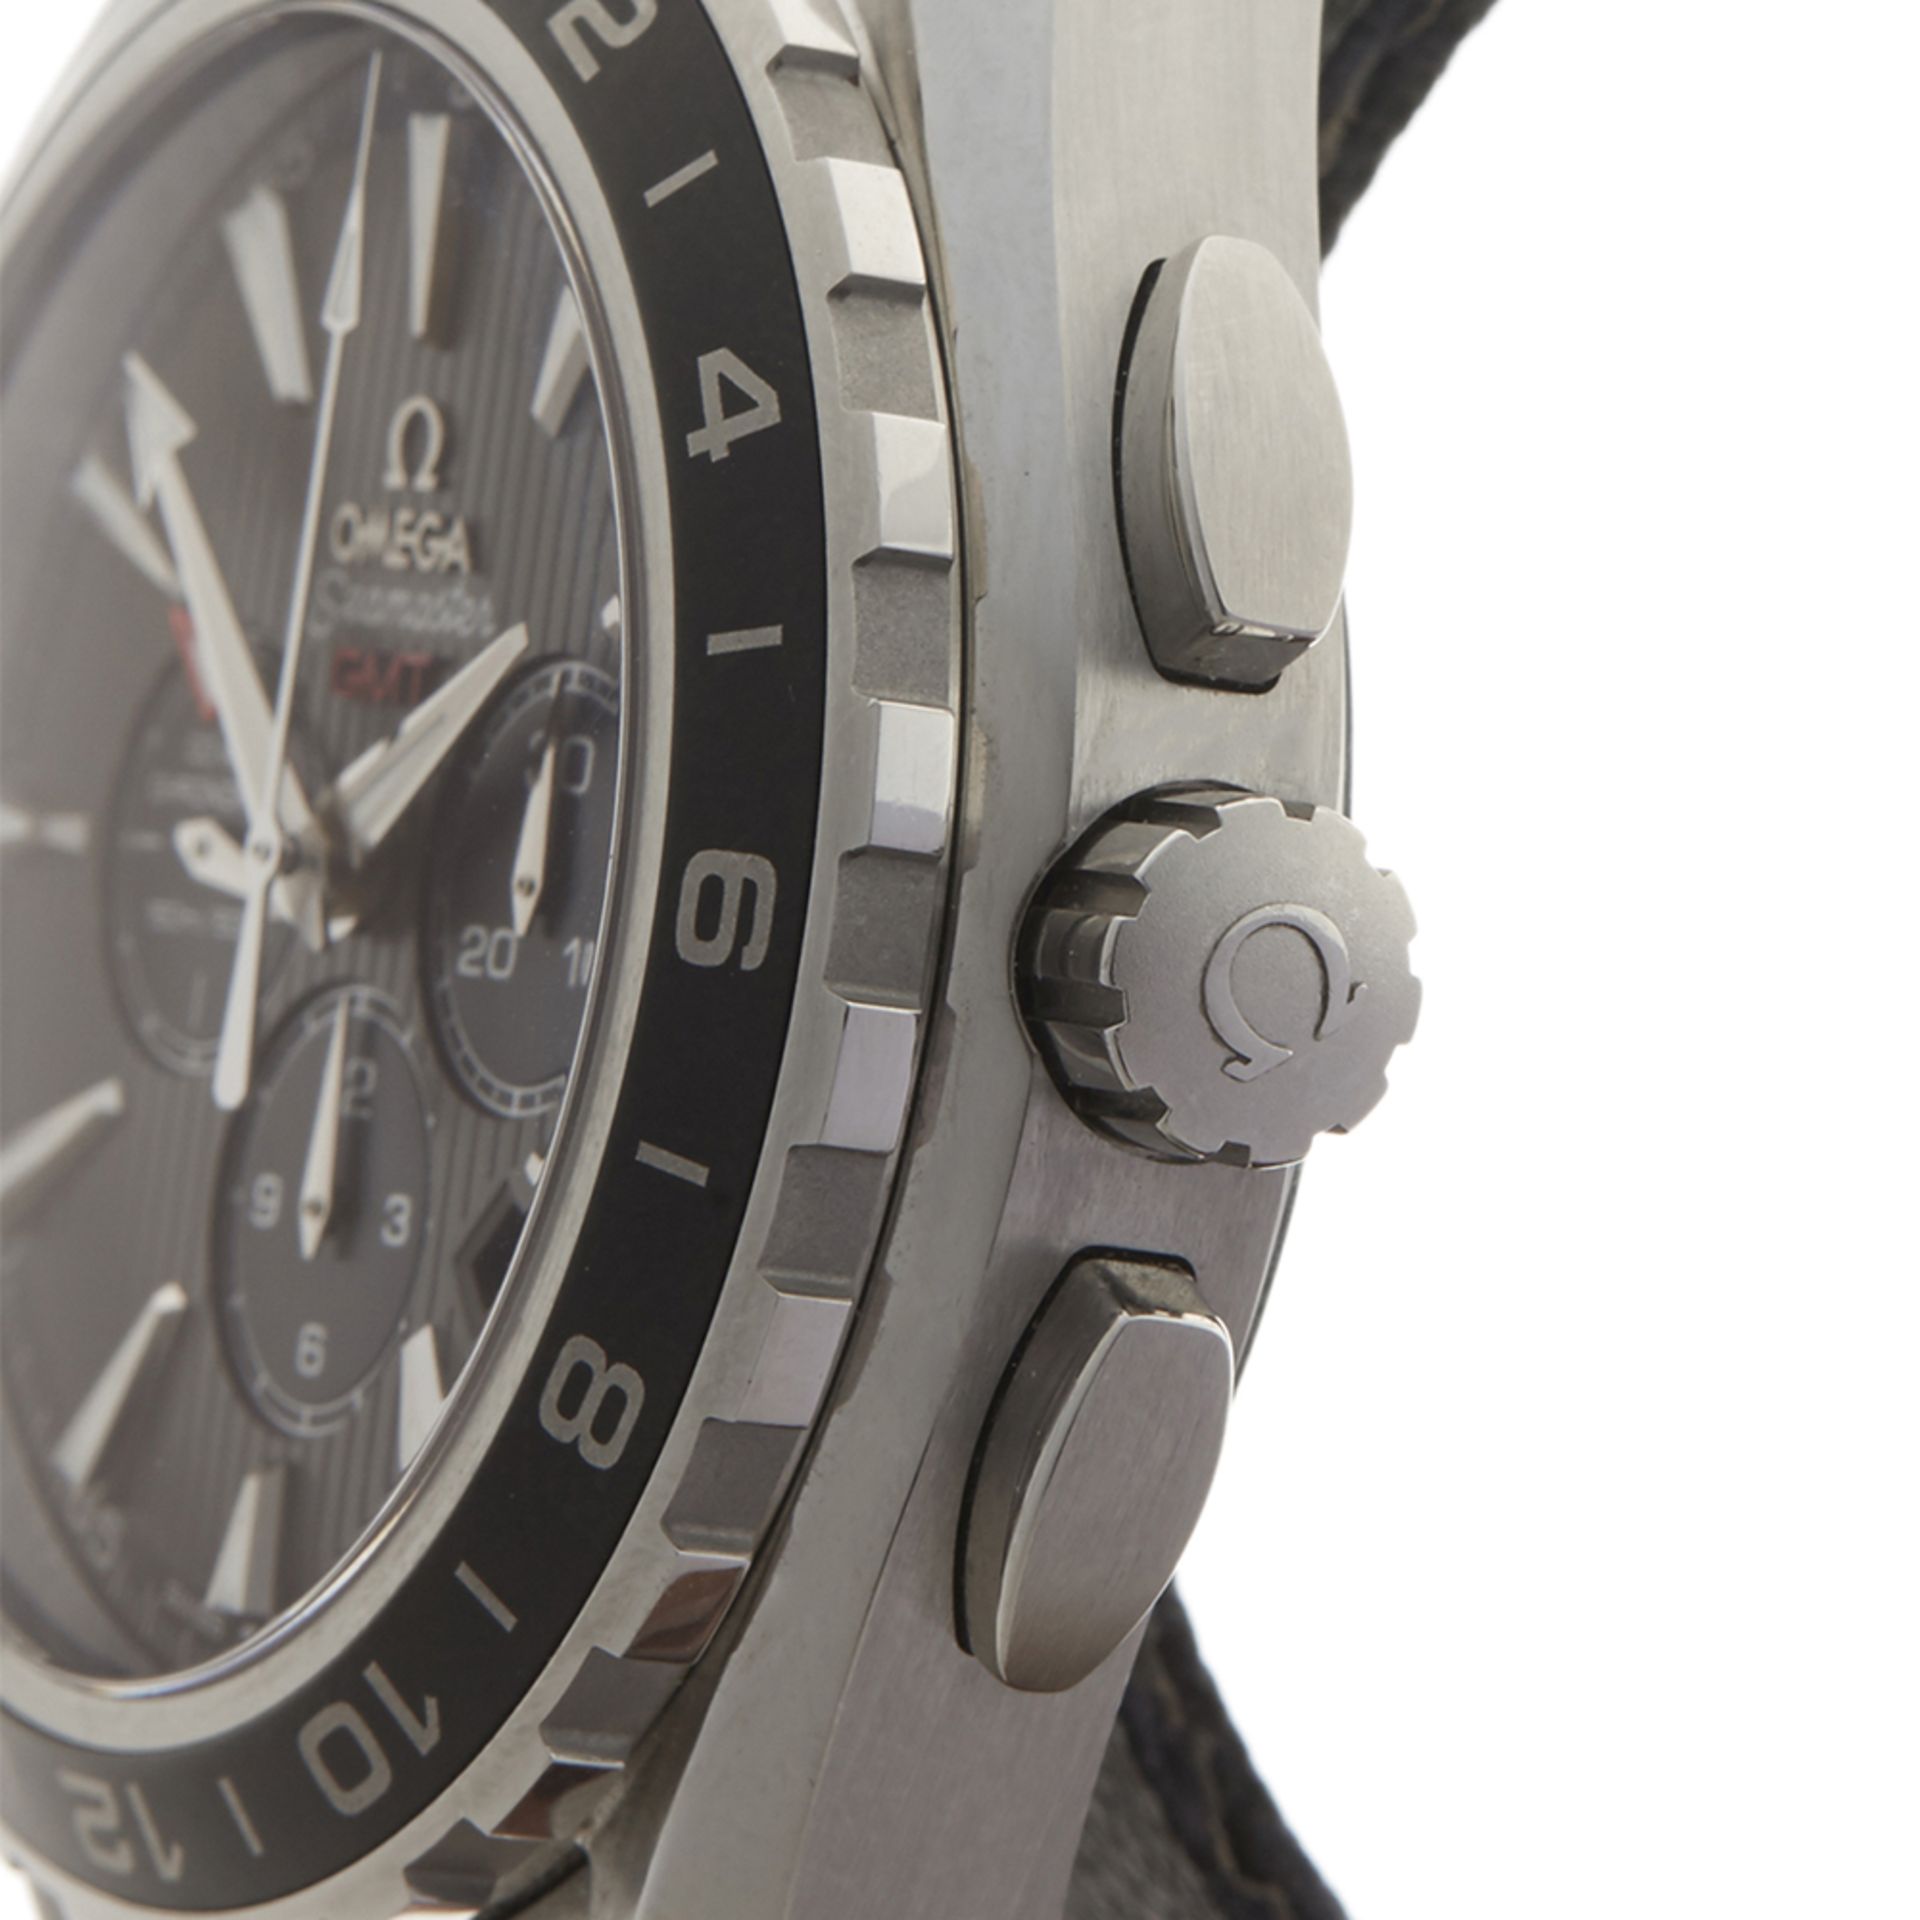 Omega Seamaster Aqua Terra GMT Chronograph 44mm Stainless Steel - 231.13.44.52.06.001 - Image 4 of 9